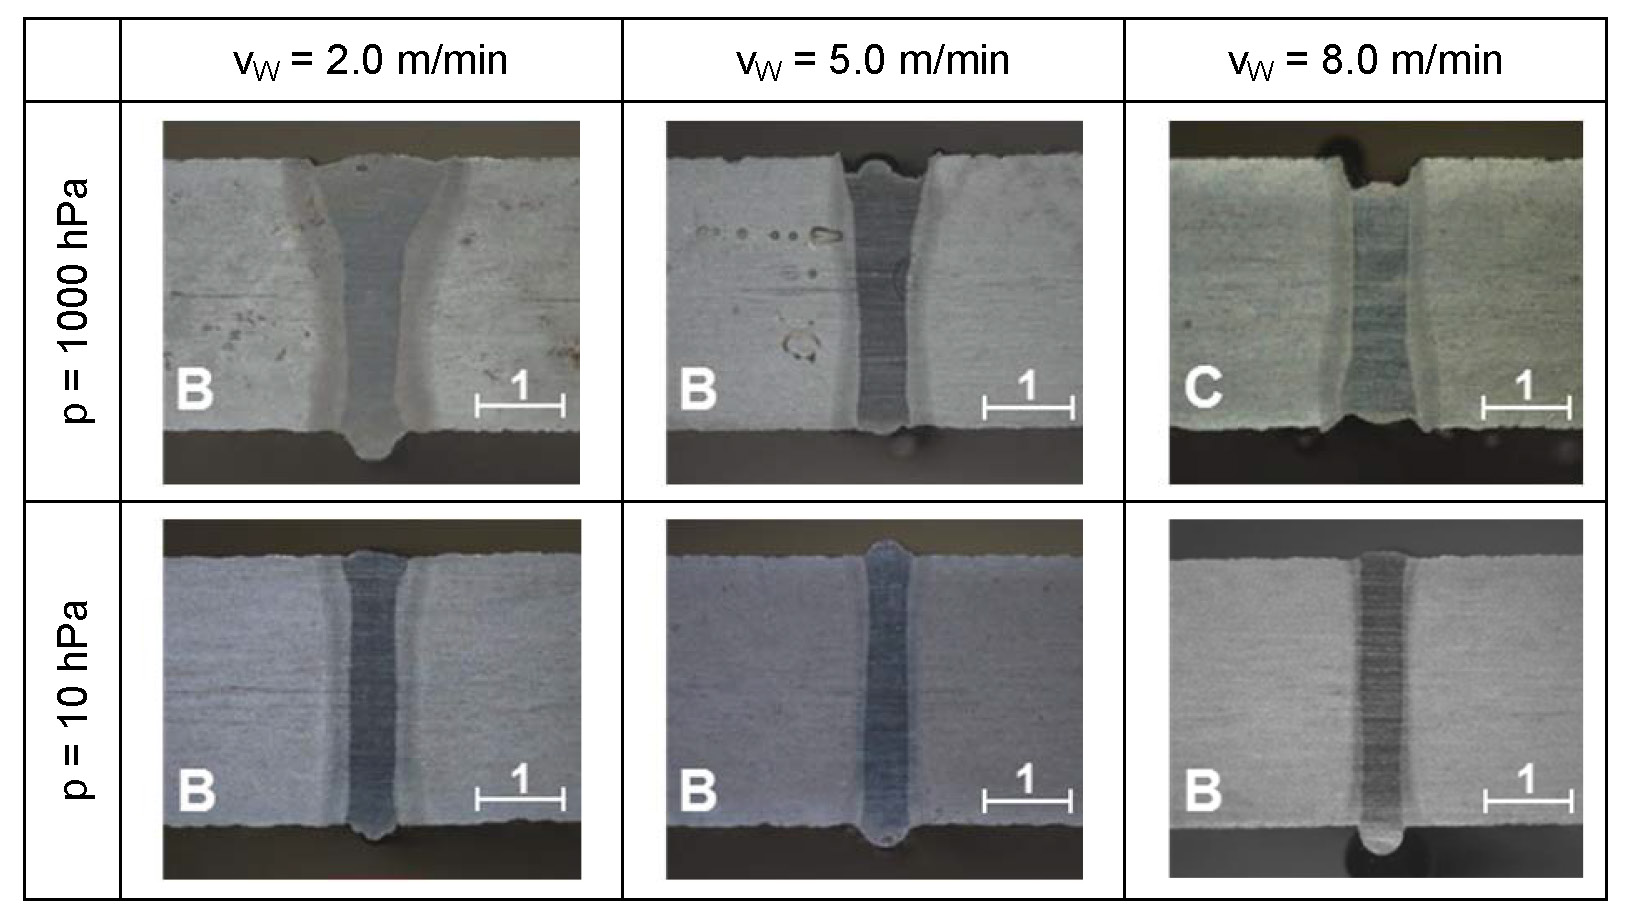 Figure 5. Weld seam geometry depending on ambient pressure and welding speed in 3 mm 16MnCr5